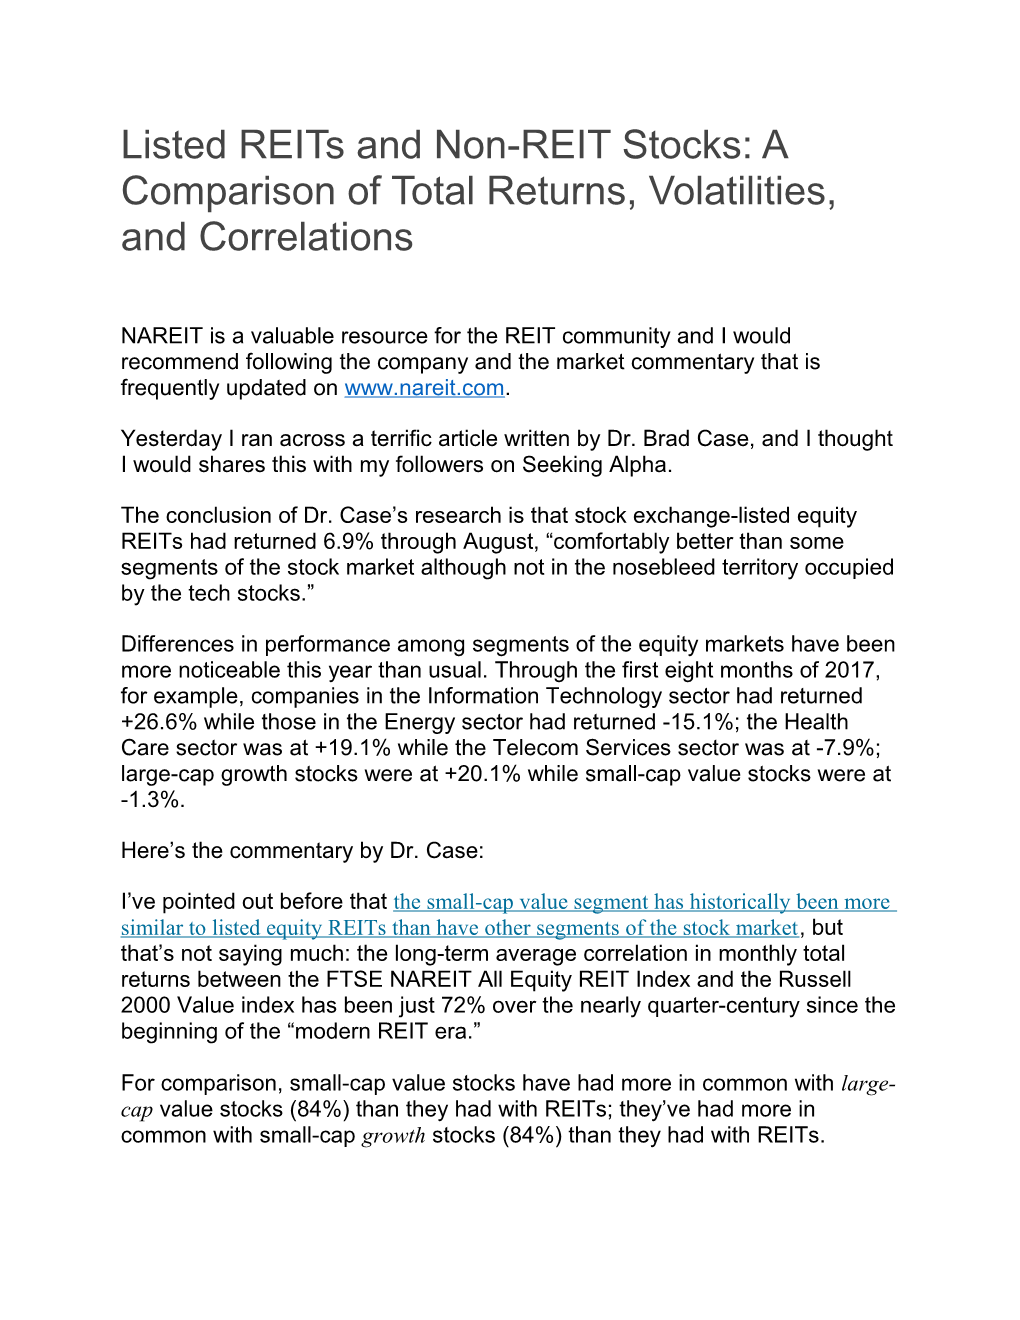 Listed Reits and Non-REIT Stocks: a Comparison of Total Returns, Volatilities, and Correlations